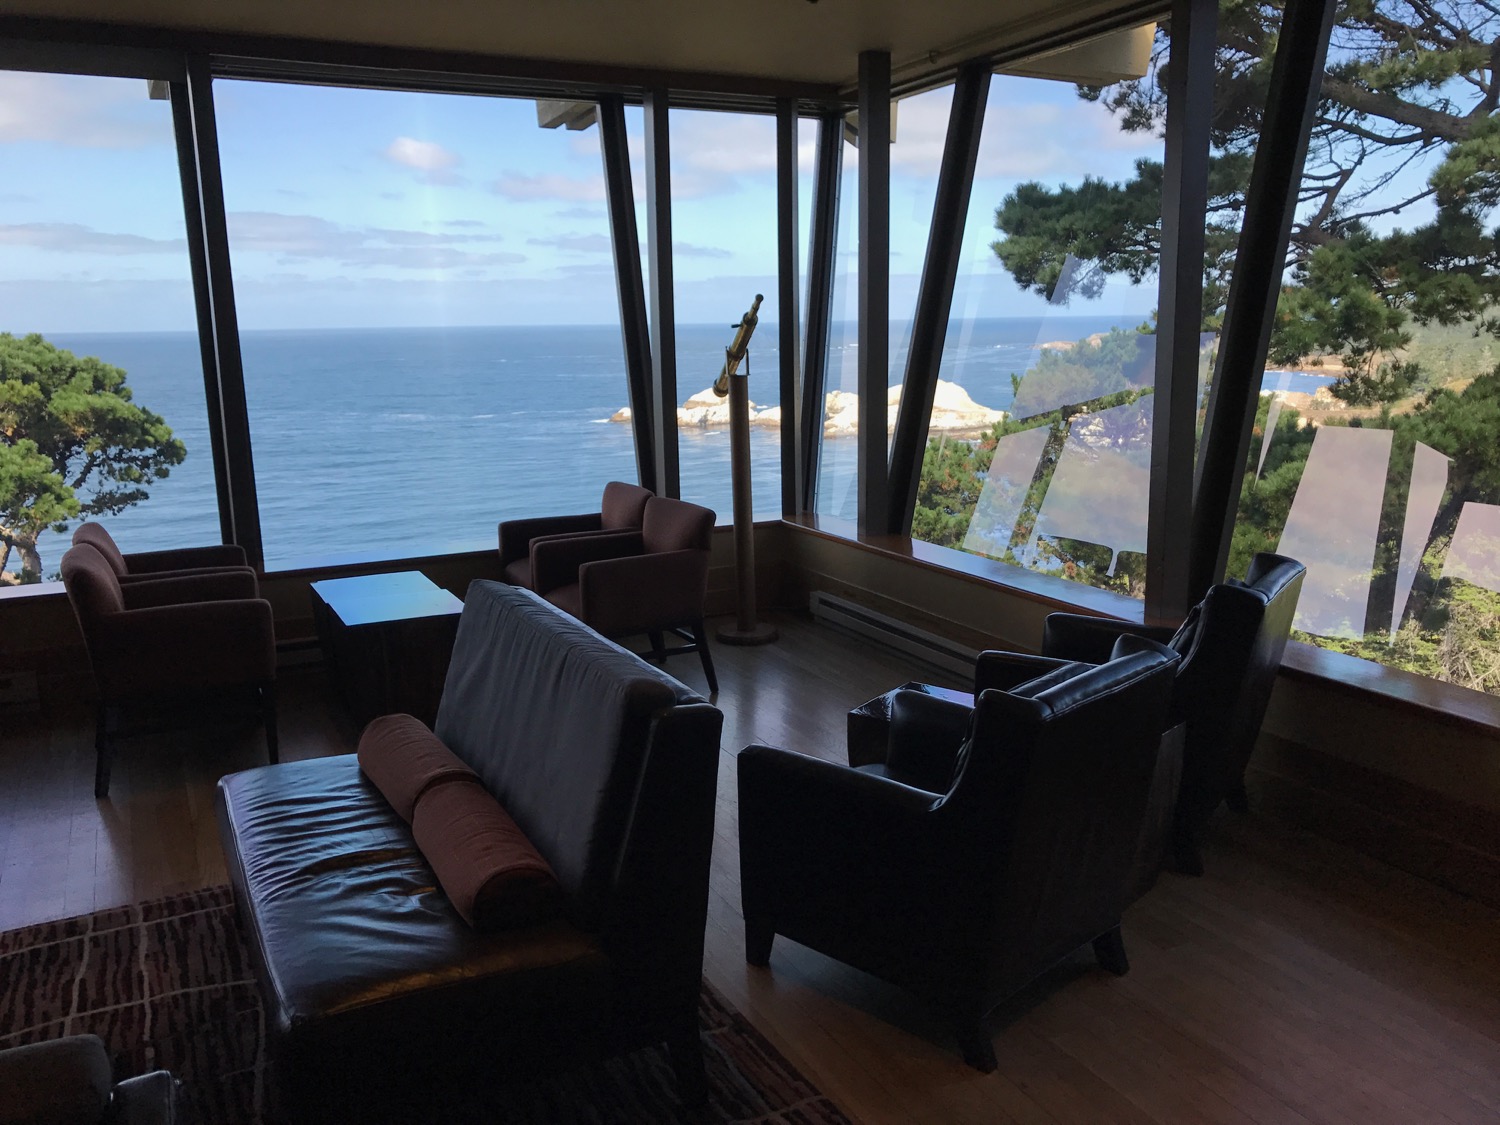 a room with a view of the ocean